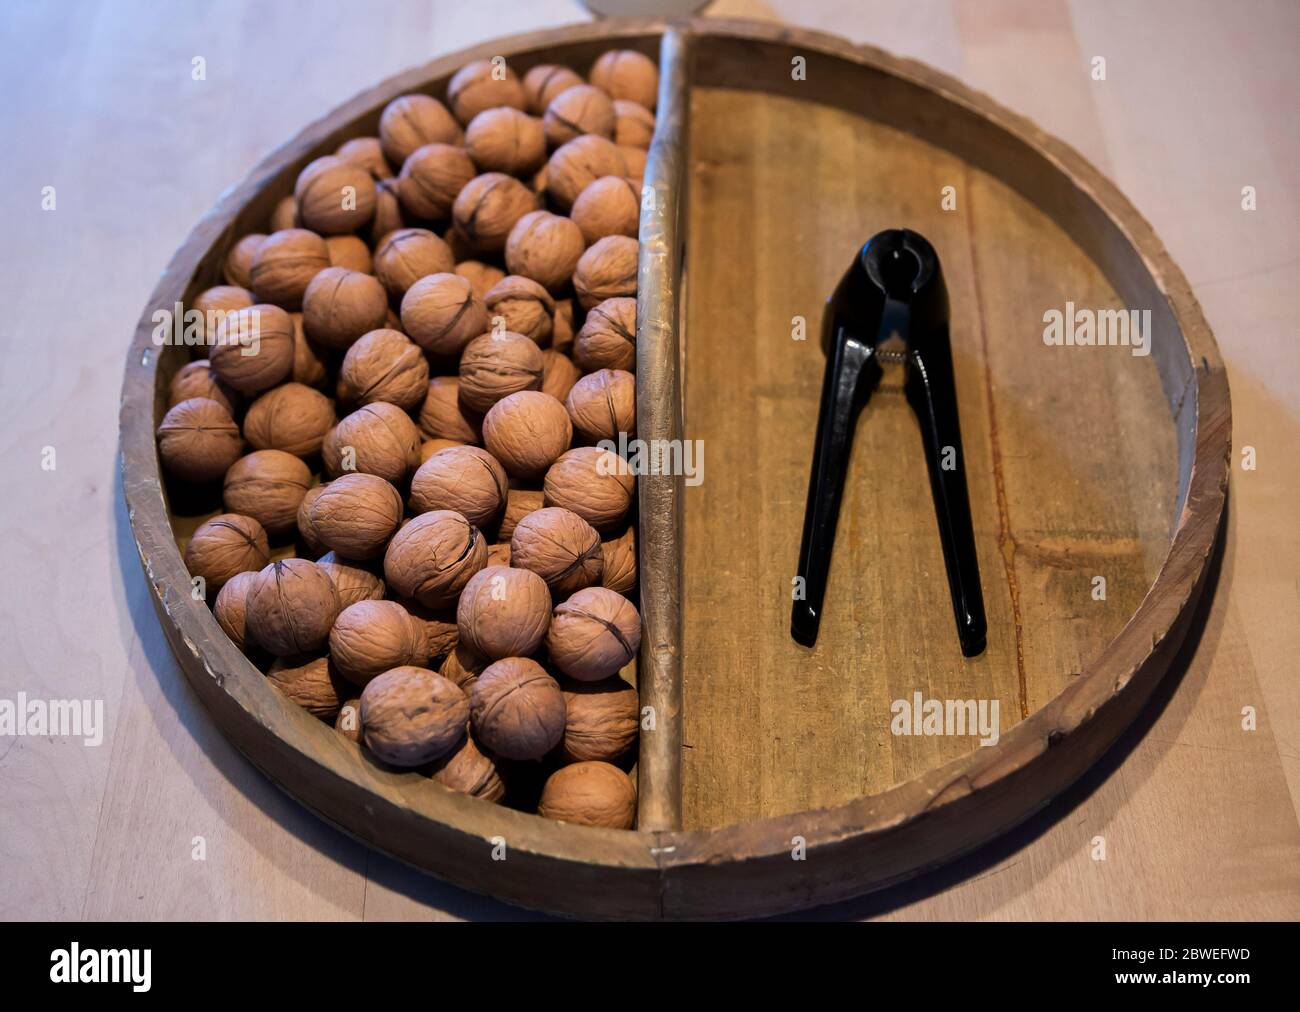 walnuts and a nut cracker stored in an old round wooden bowl from a overhead view Stock Photo